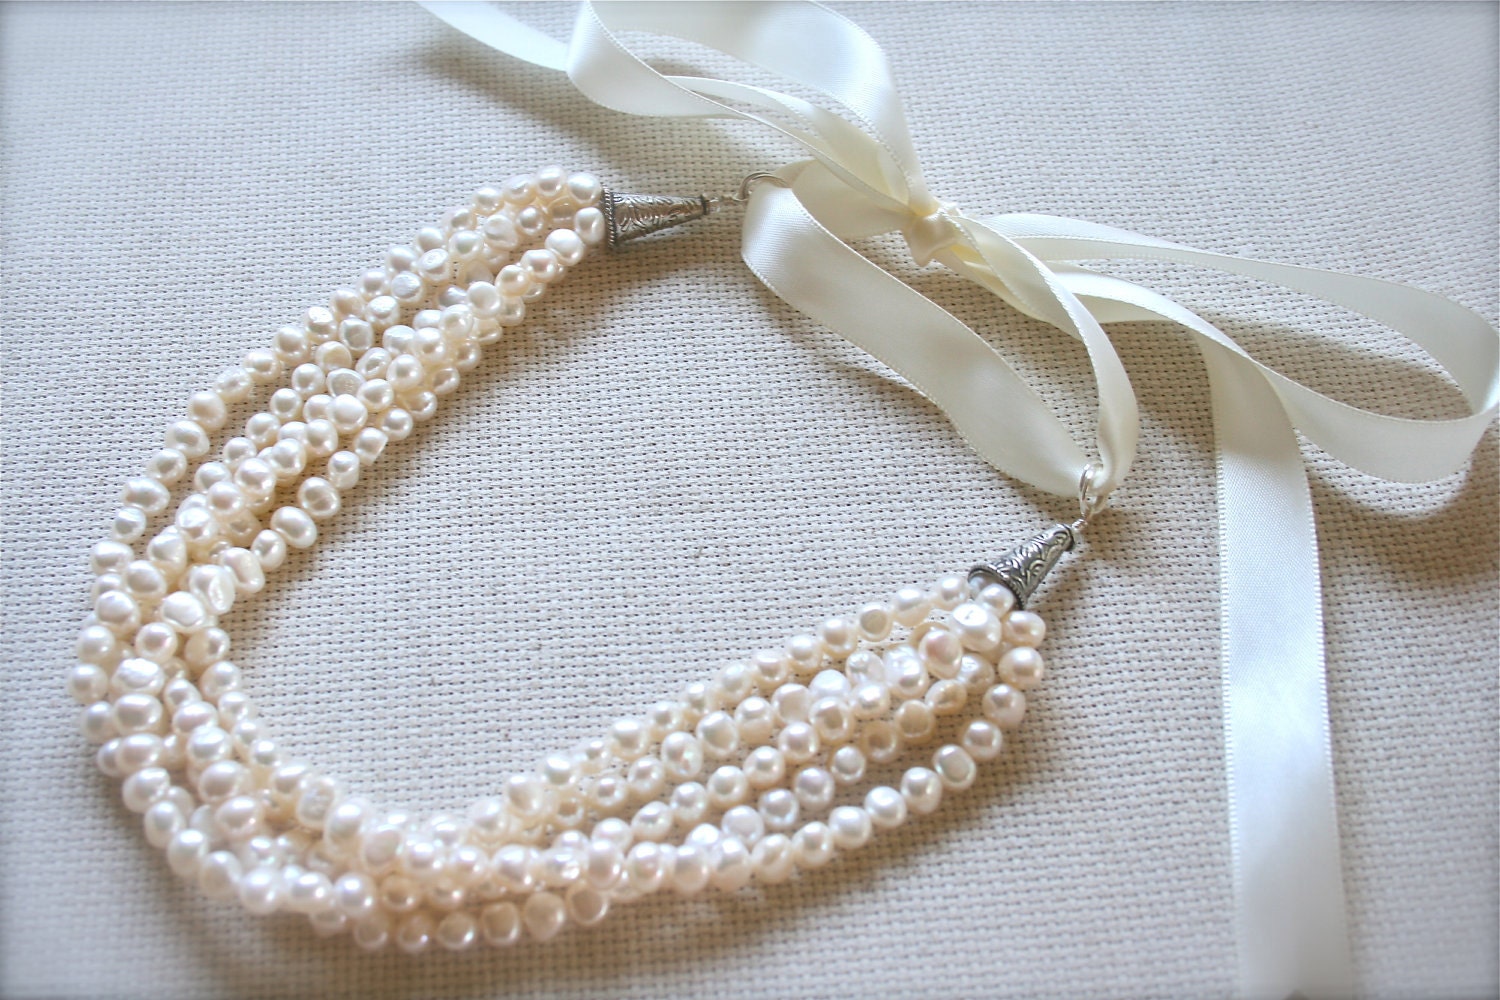 Pearl Necklace, Bib Necklace, Freshwater Pearl, Stranded Necklace, Wedding Jewelry, Bridal Jewelry